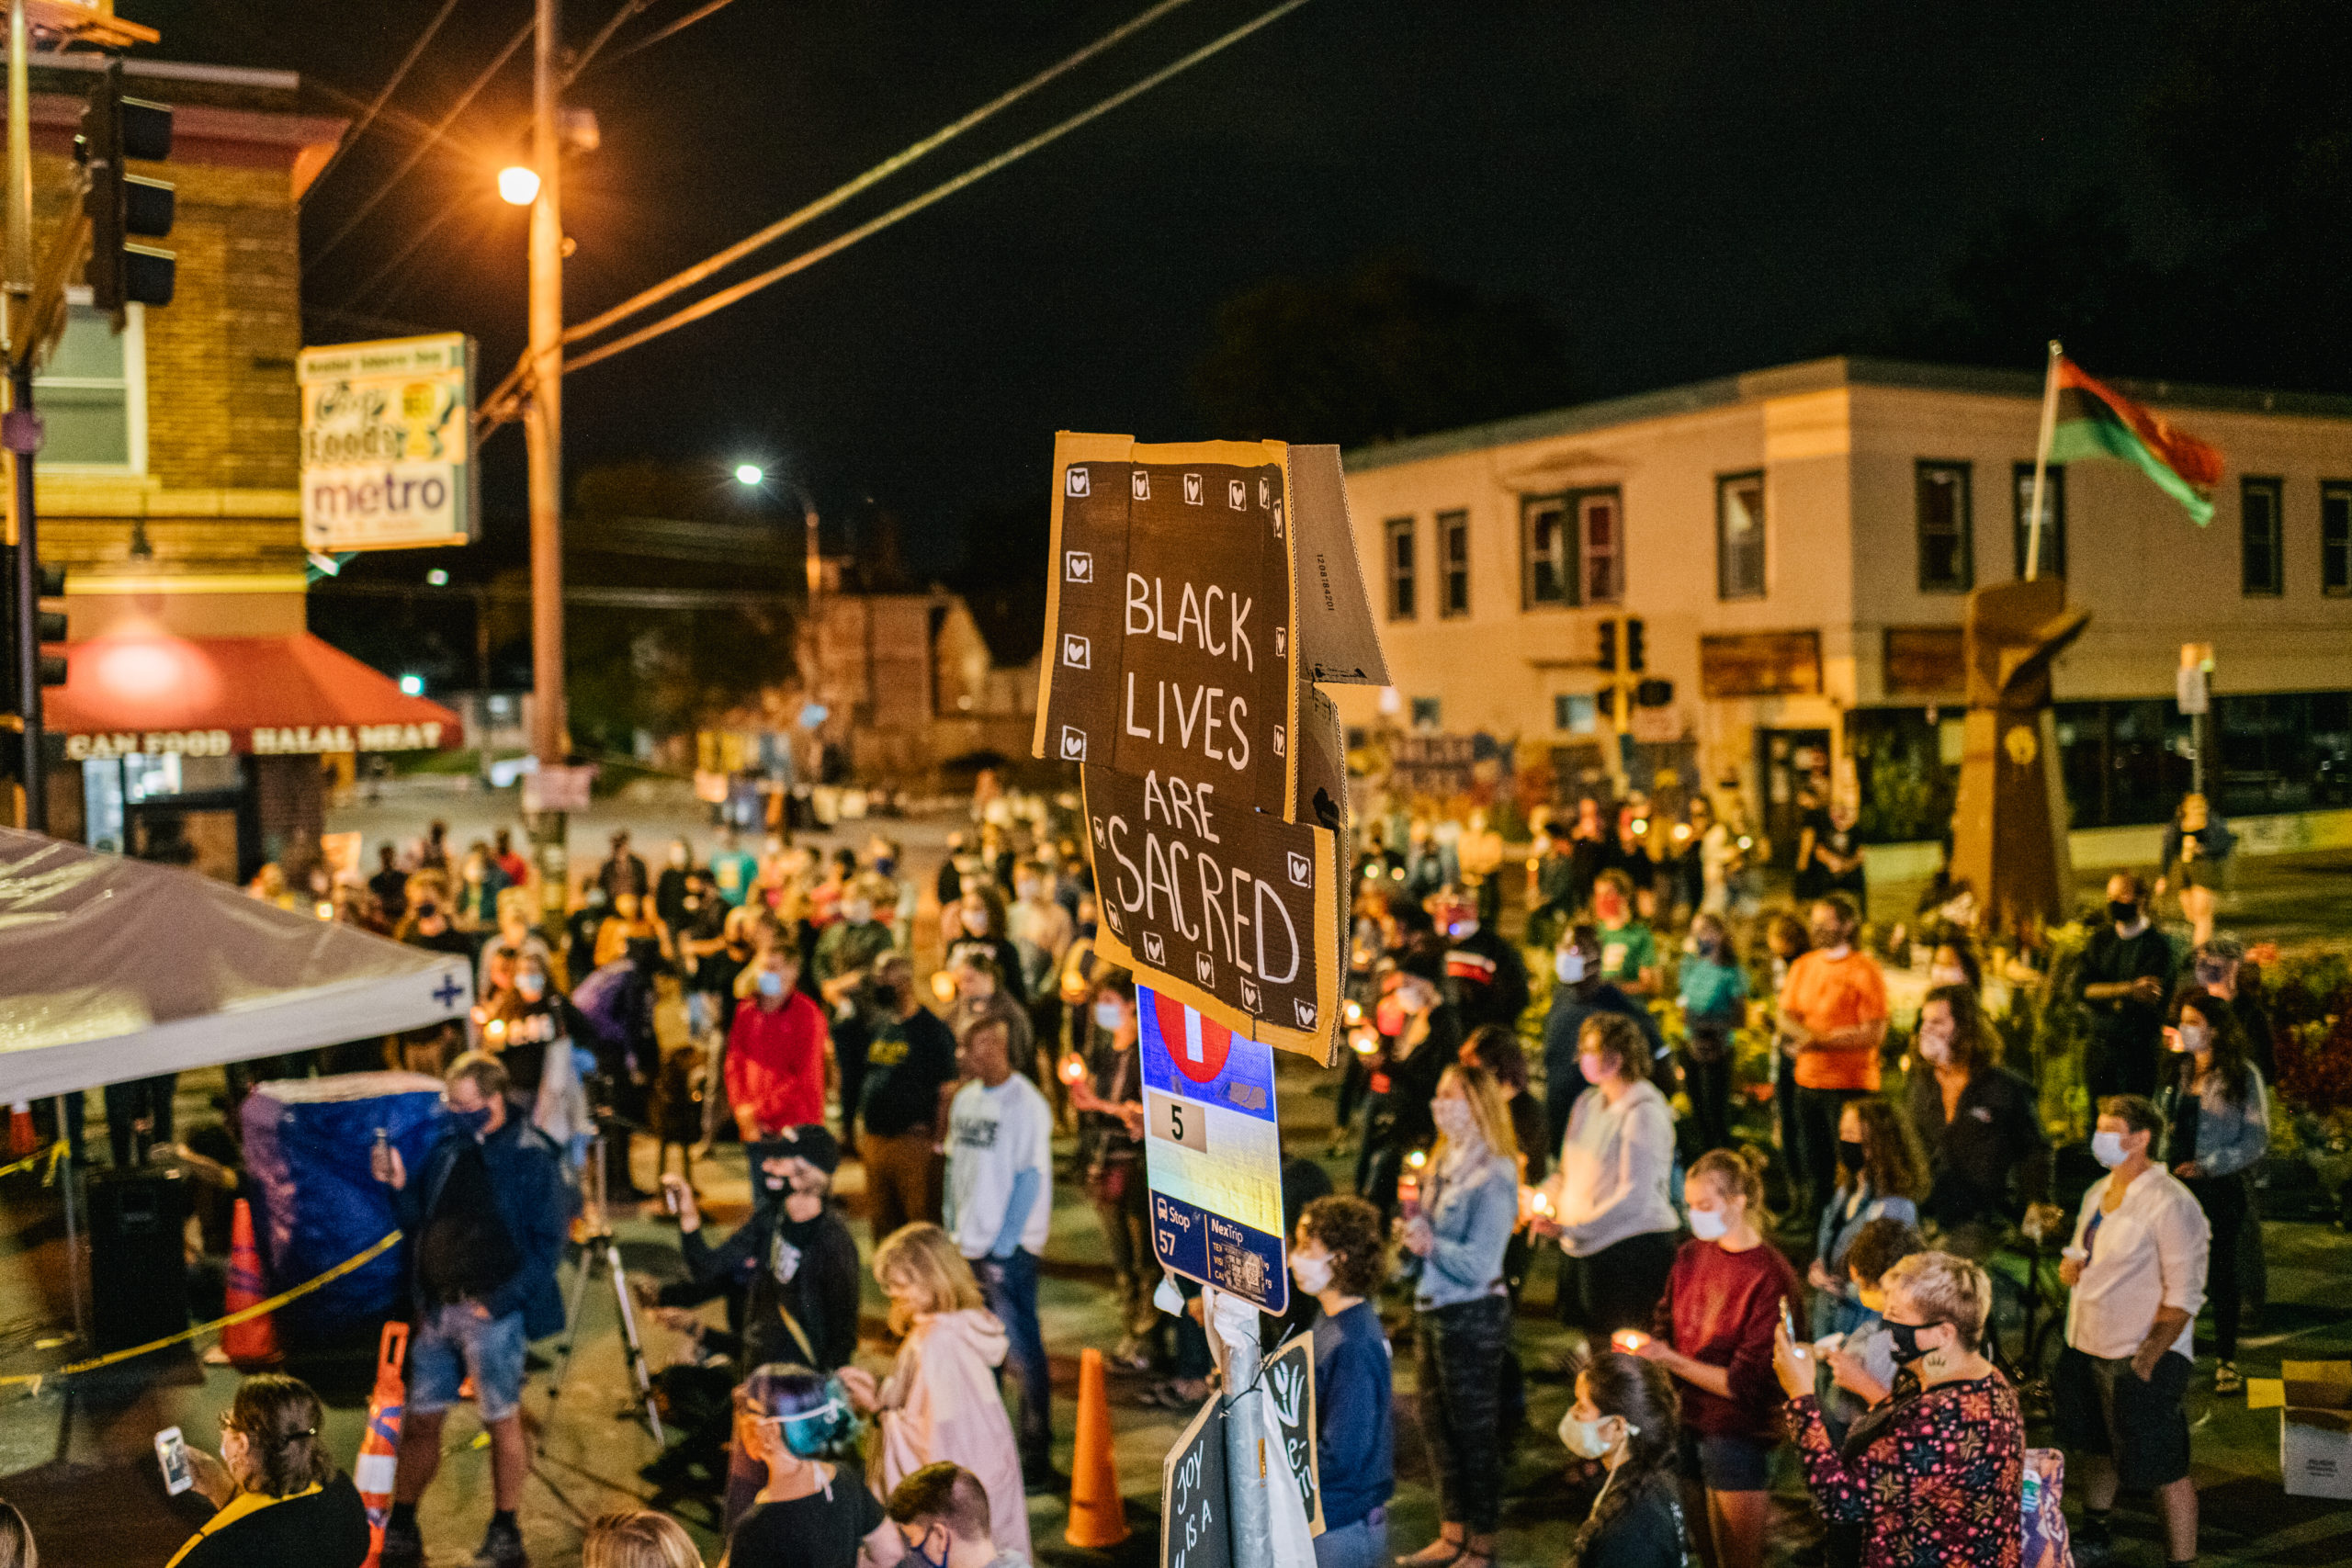 MINNEAPOLIS, MN - AUGUST 30: Demonstrators participate in a candlelight vigil on August 30, 2020 in Minneapolis, Minnesota. The community gathered in the intersection of 38th Street and Chicago Ave for a candlelight vigil to honor Jacob Blake, 29, who was shot on August 23. Video filmed of the incident appears to show Blake shot multiple times in the back by Wisconsin police officers while attempting to enter the drivers side of a vehicle. The 29-year-old Blake was undergoing surgery for a severed spinal cord, shattered vertebrae and severe damage to organs, according to the family attorneys in published accounts. (Photo by Brandon Bell/Getty Images)